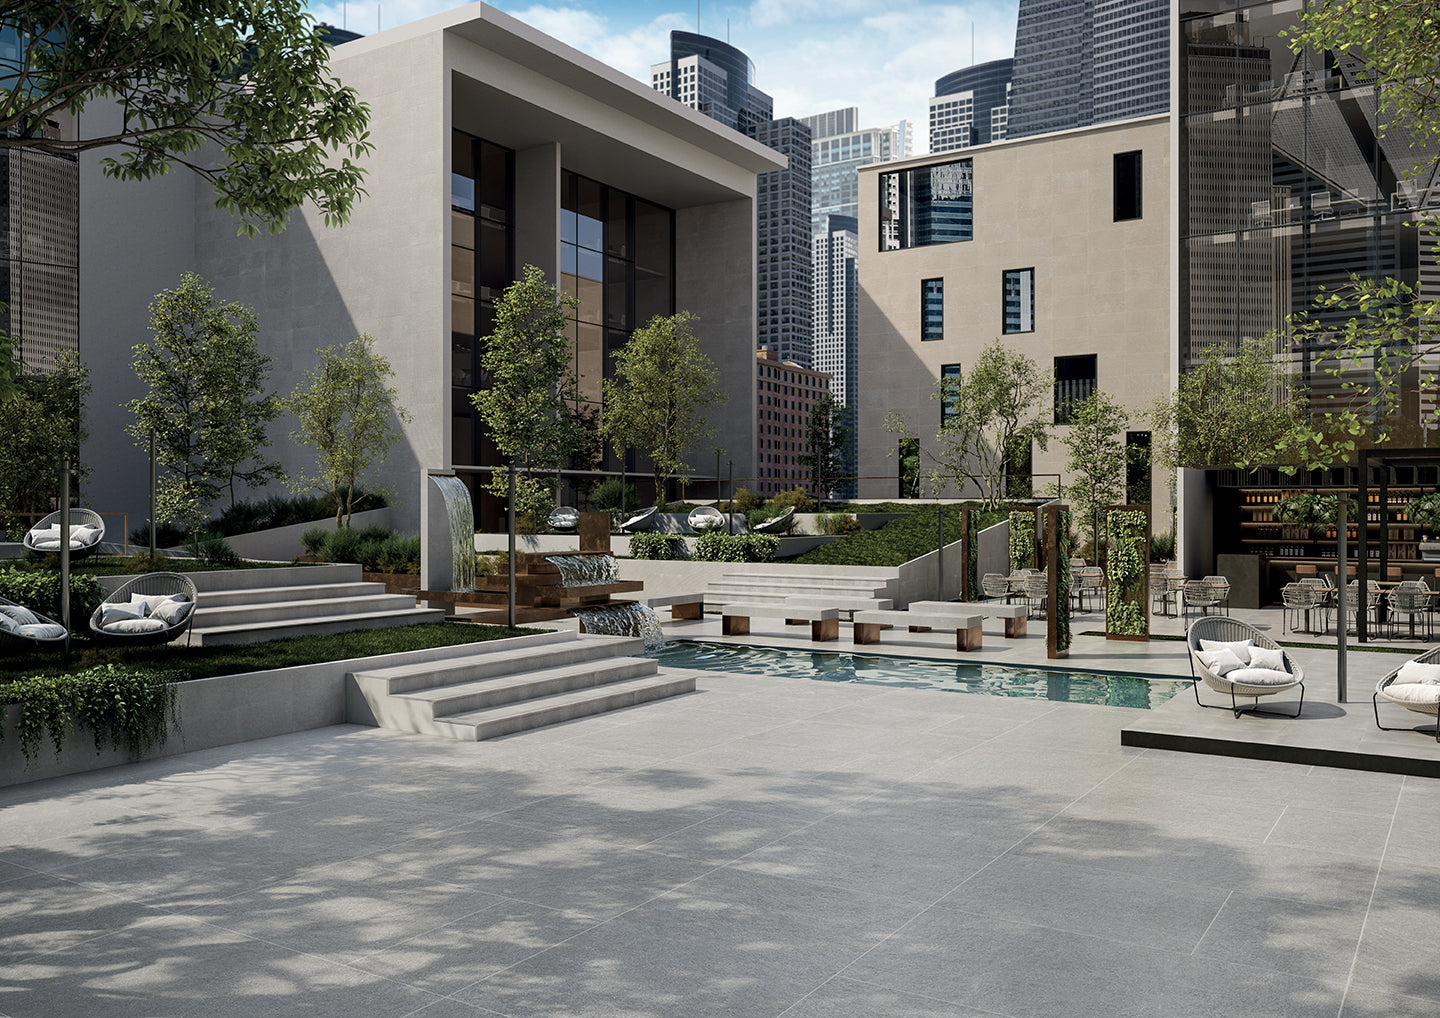 Limestone porcelain tile collection by Surface Group showcased in a modern outdoor patio setting with cityscape background.